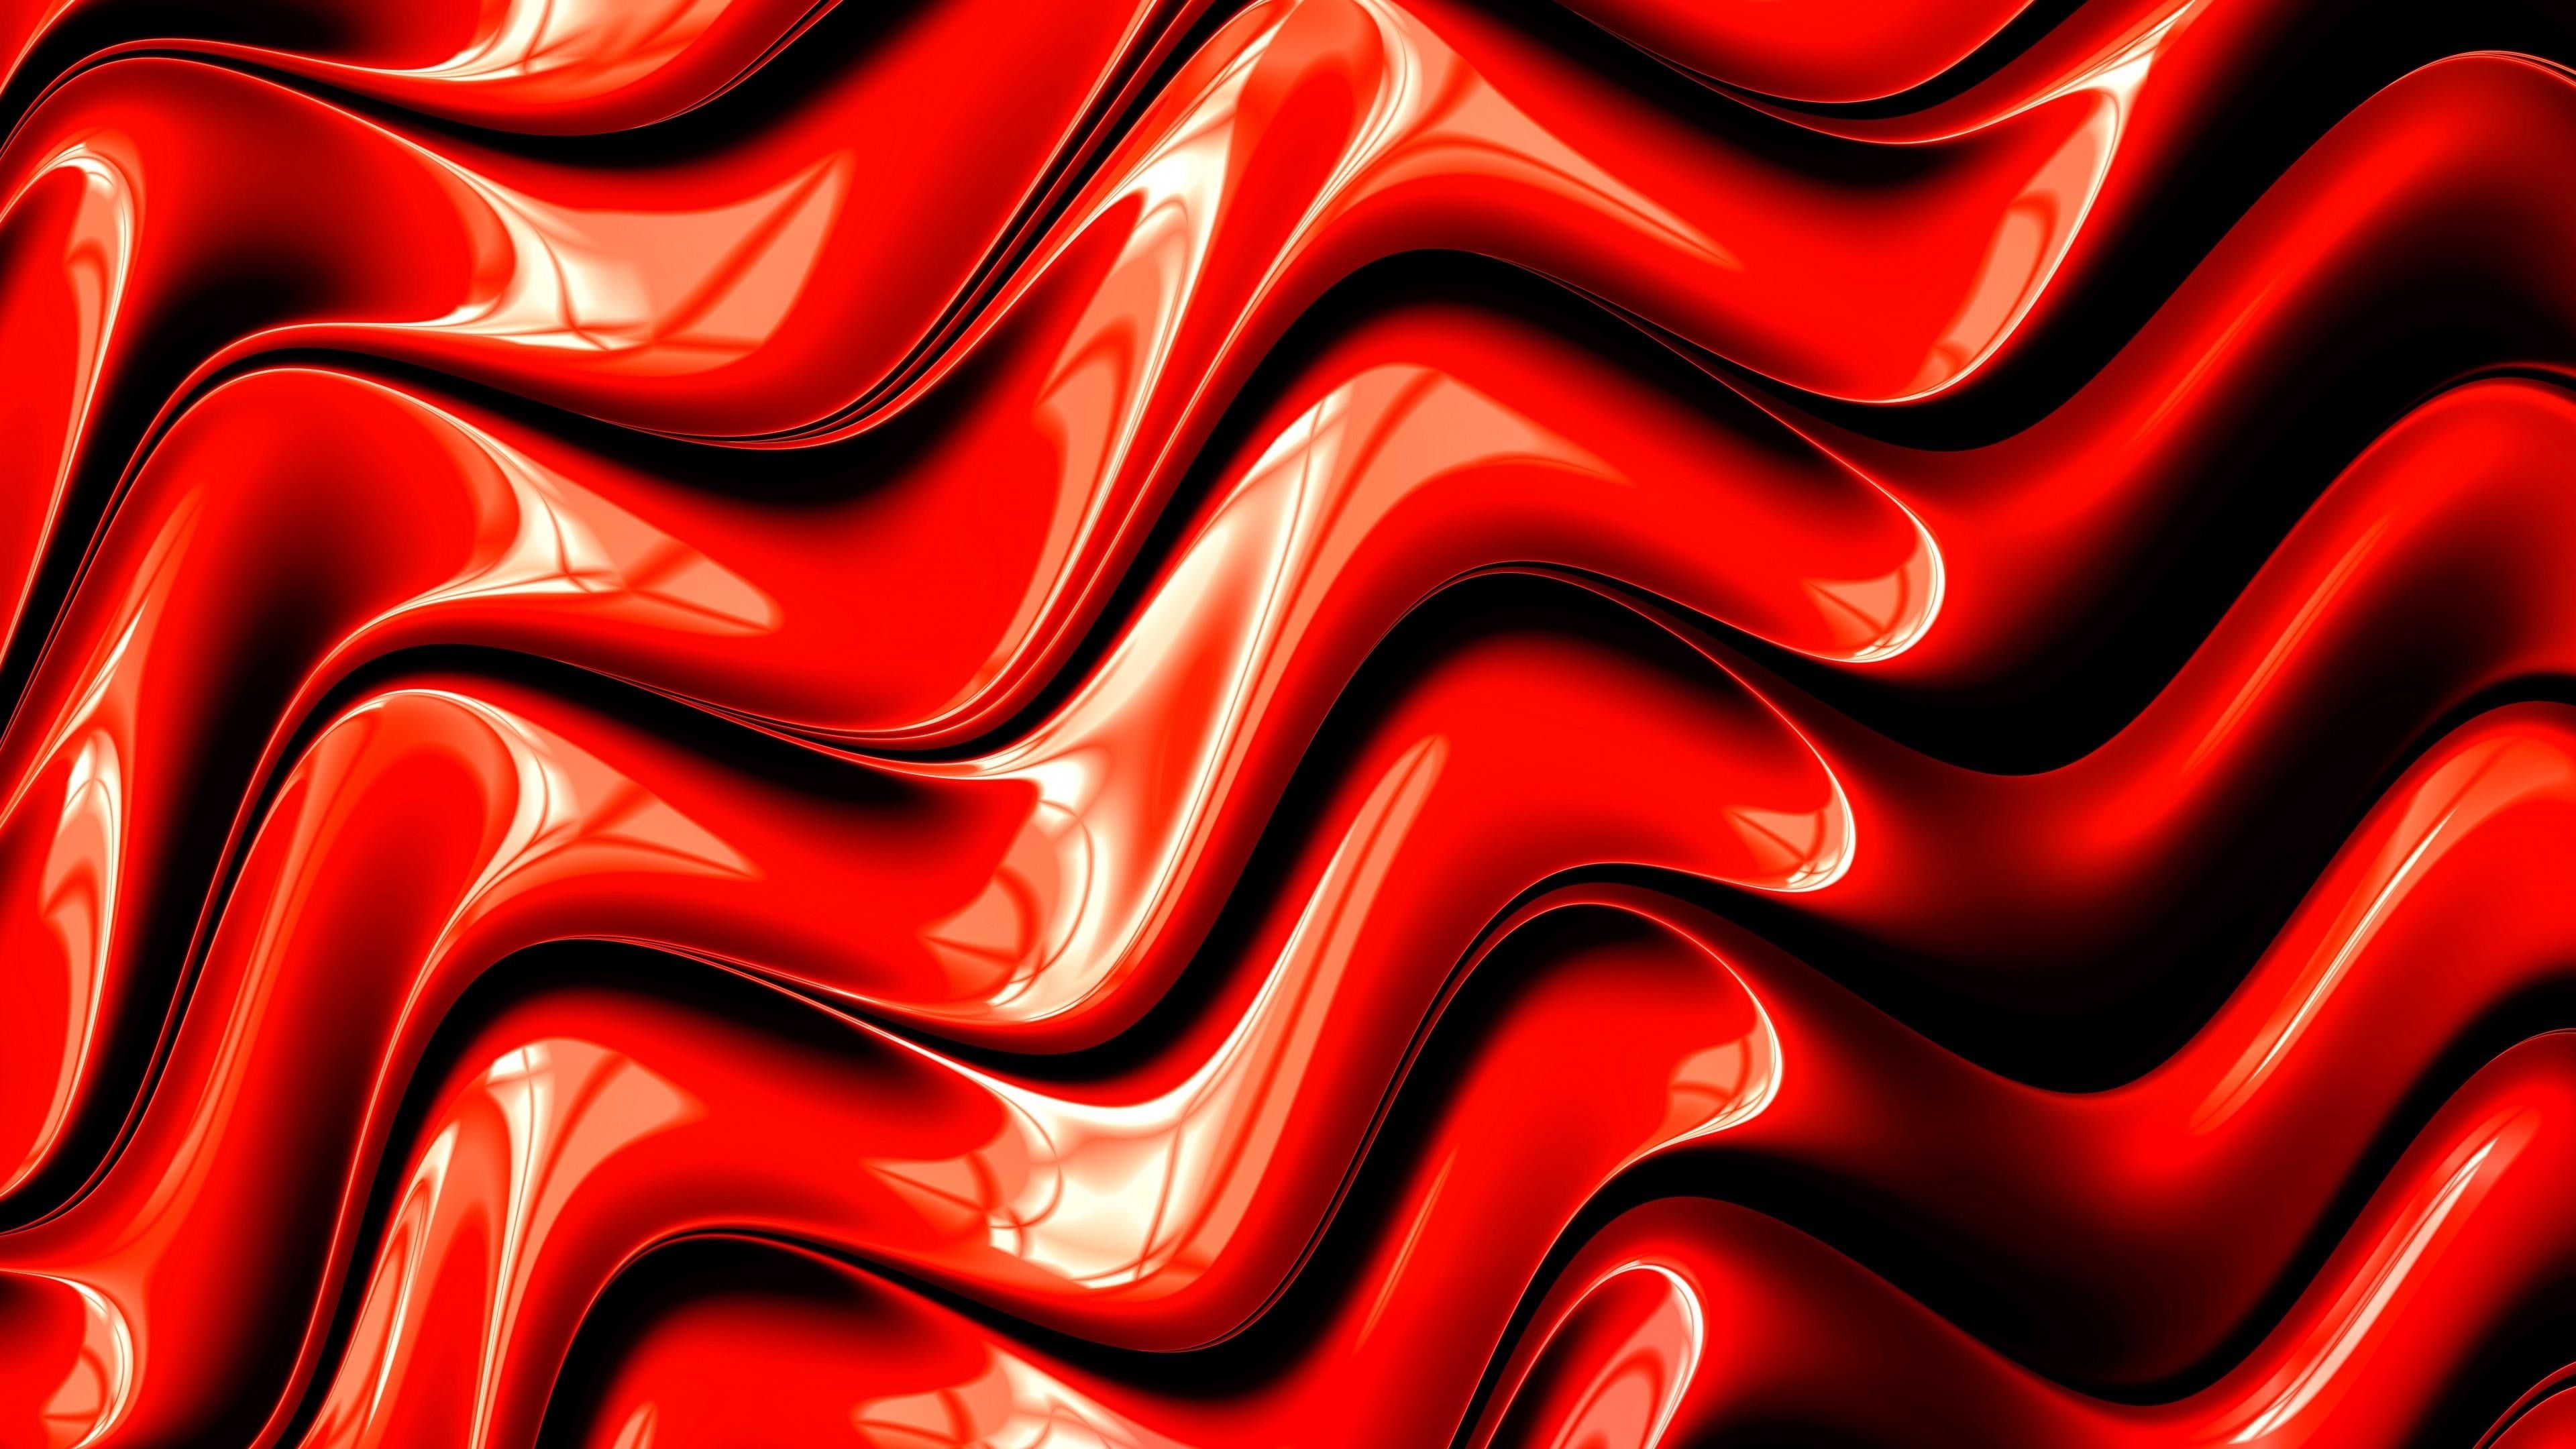 Red 3D Wallpapers